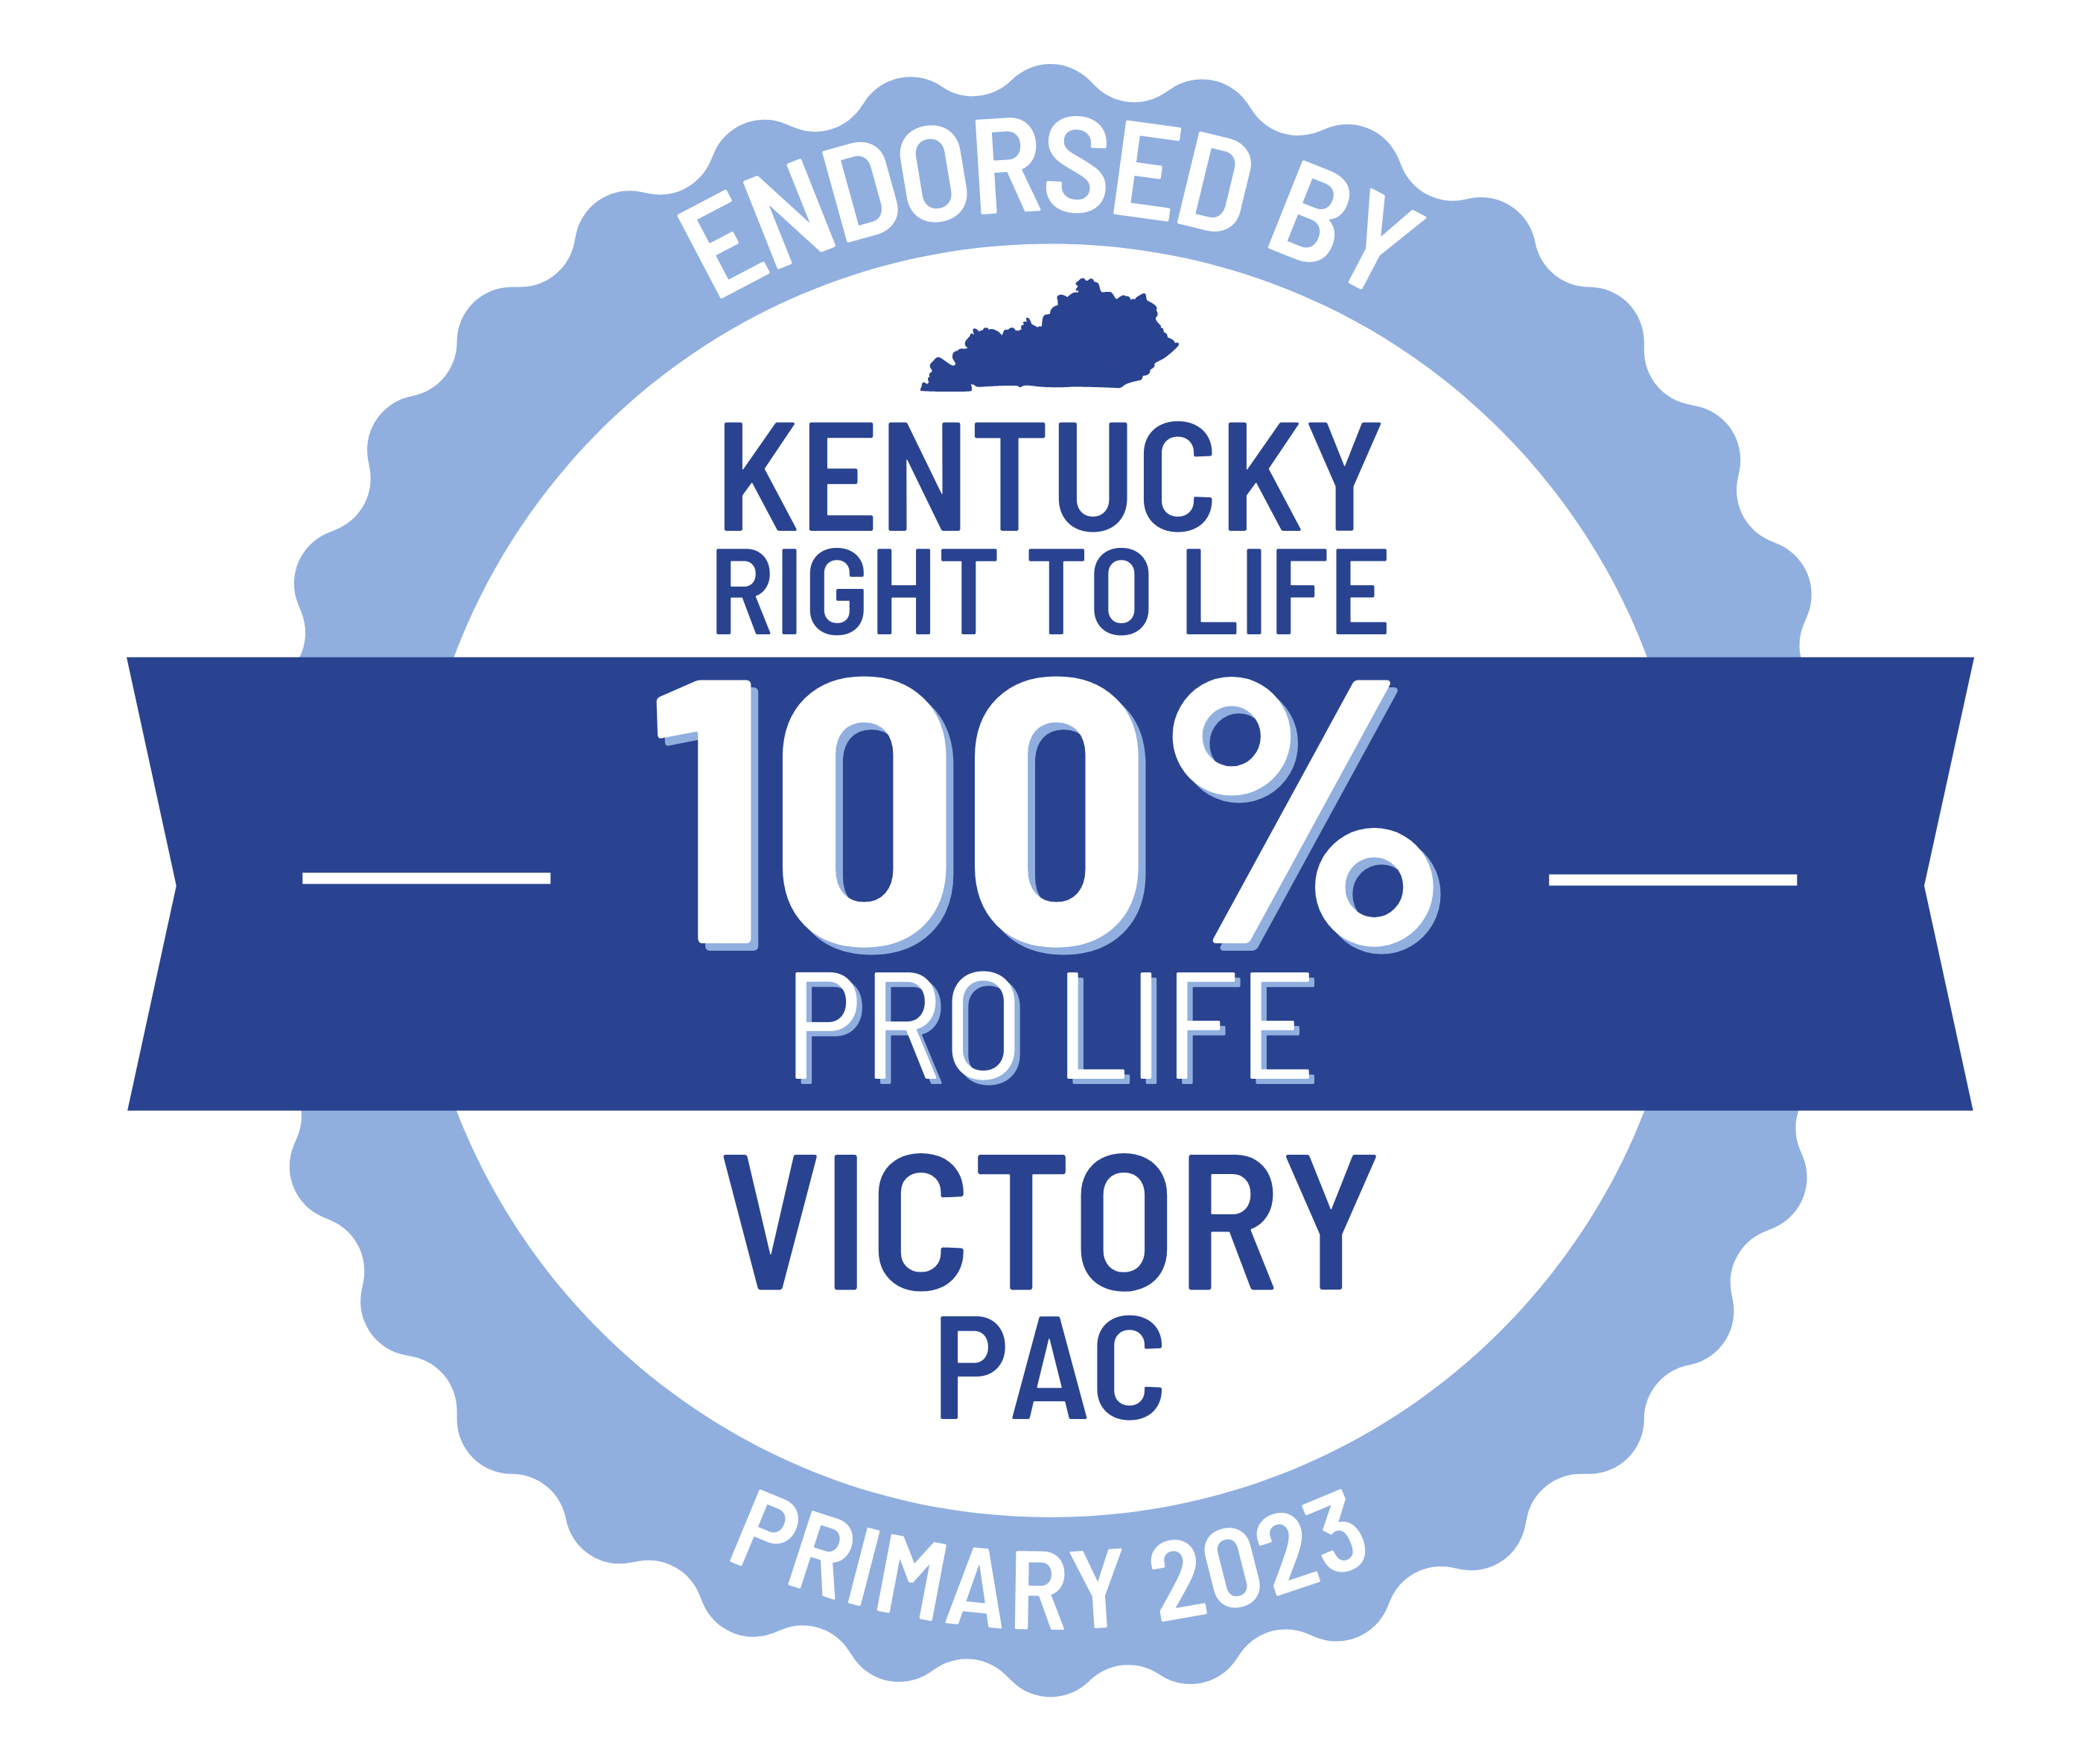 Endorsed by Kentucky Right to Life